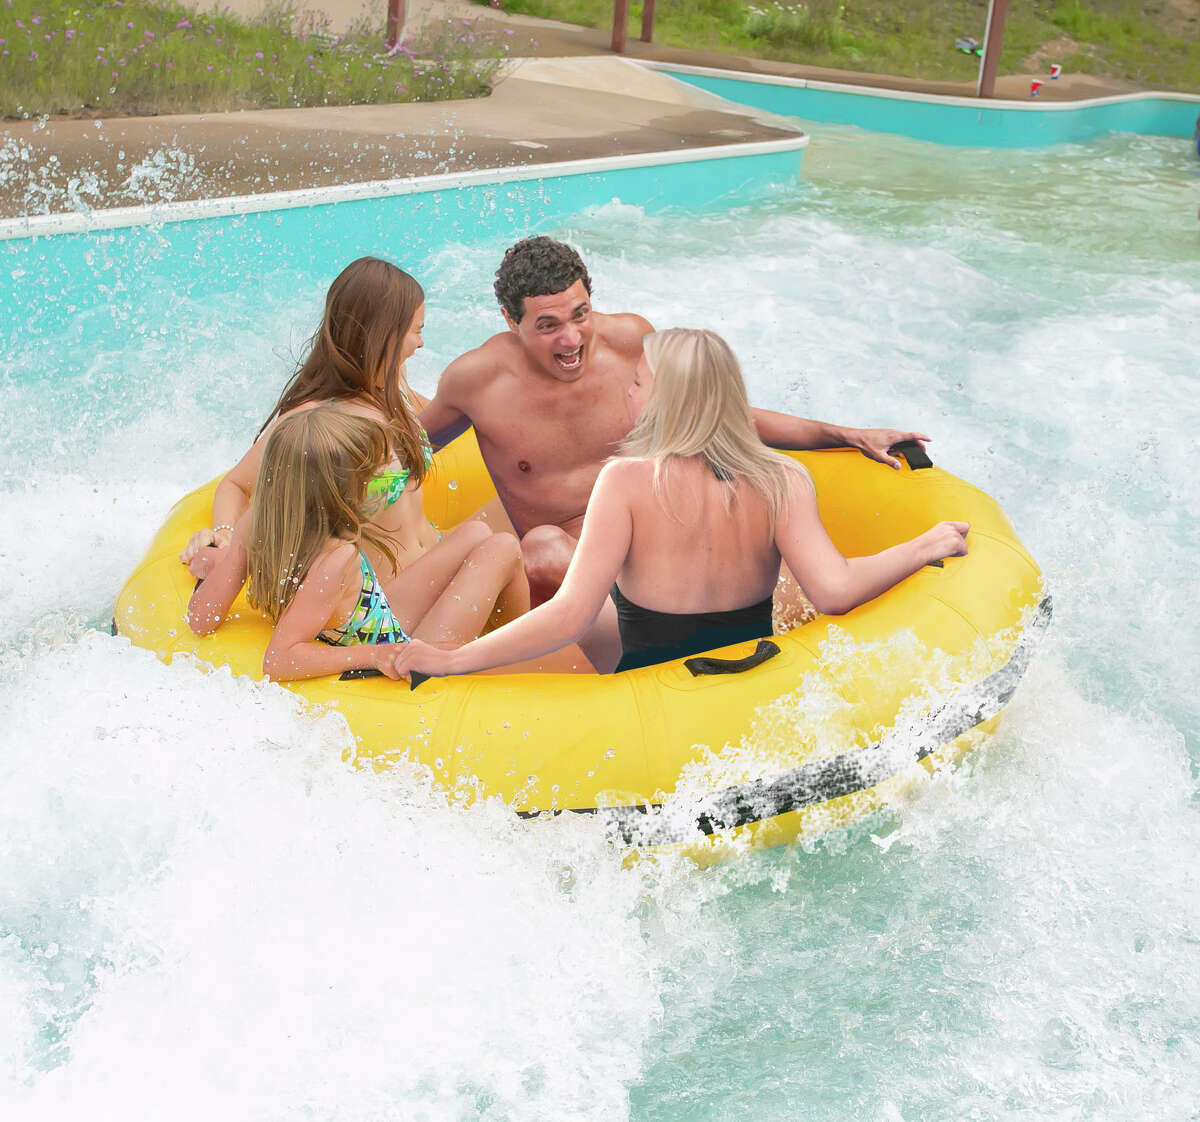 Attractions at Enchanted Forest Water Safari, like the Cascade Falls raft ride, in Old Forge can offer reprieve from traditional Adirondack activities.